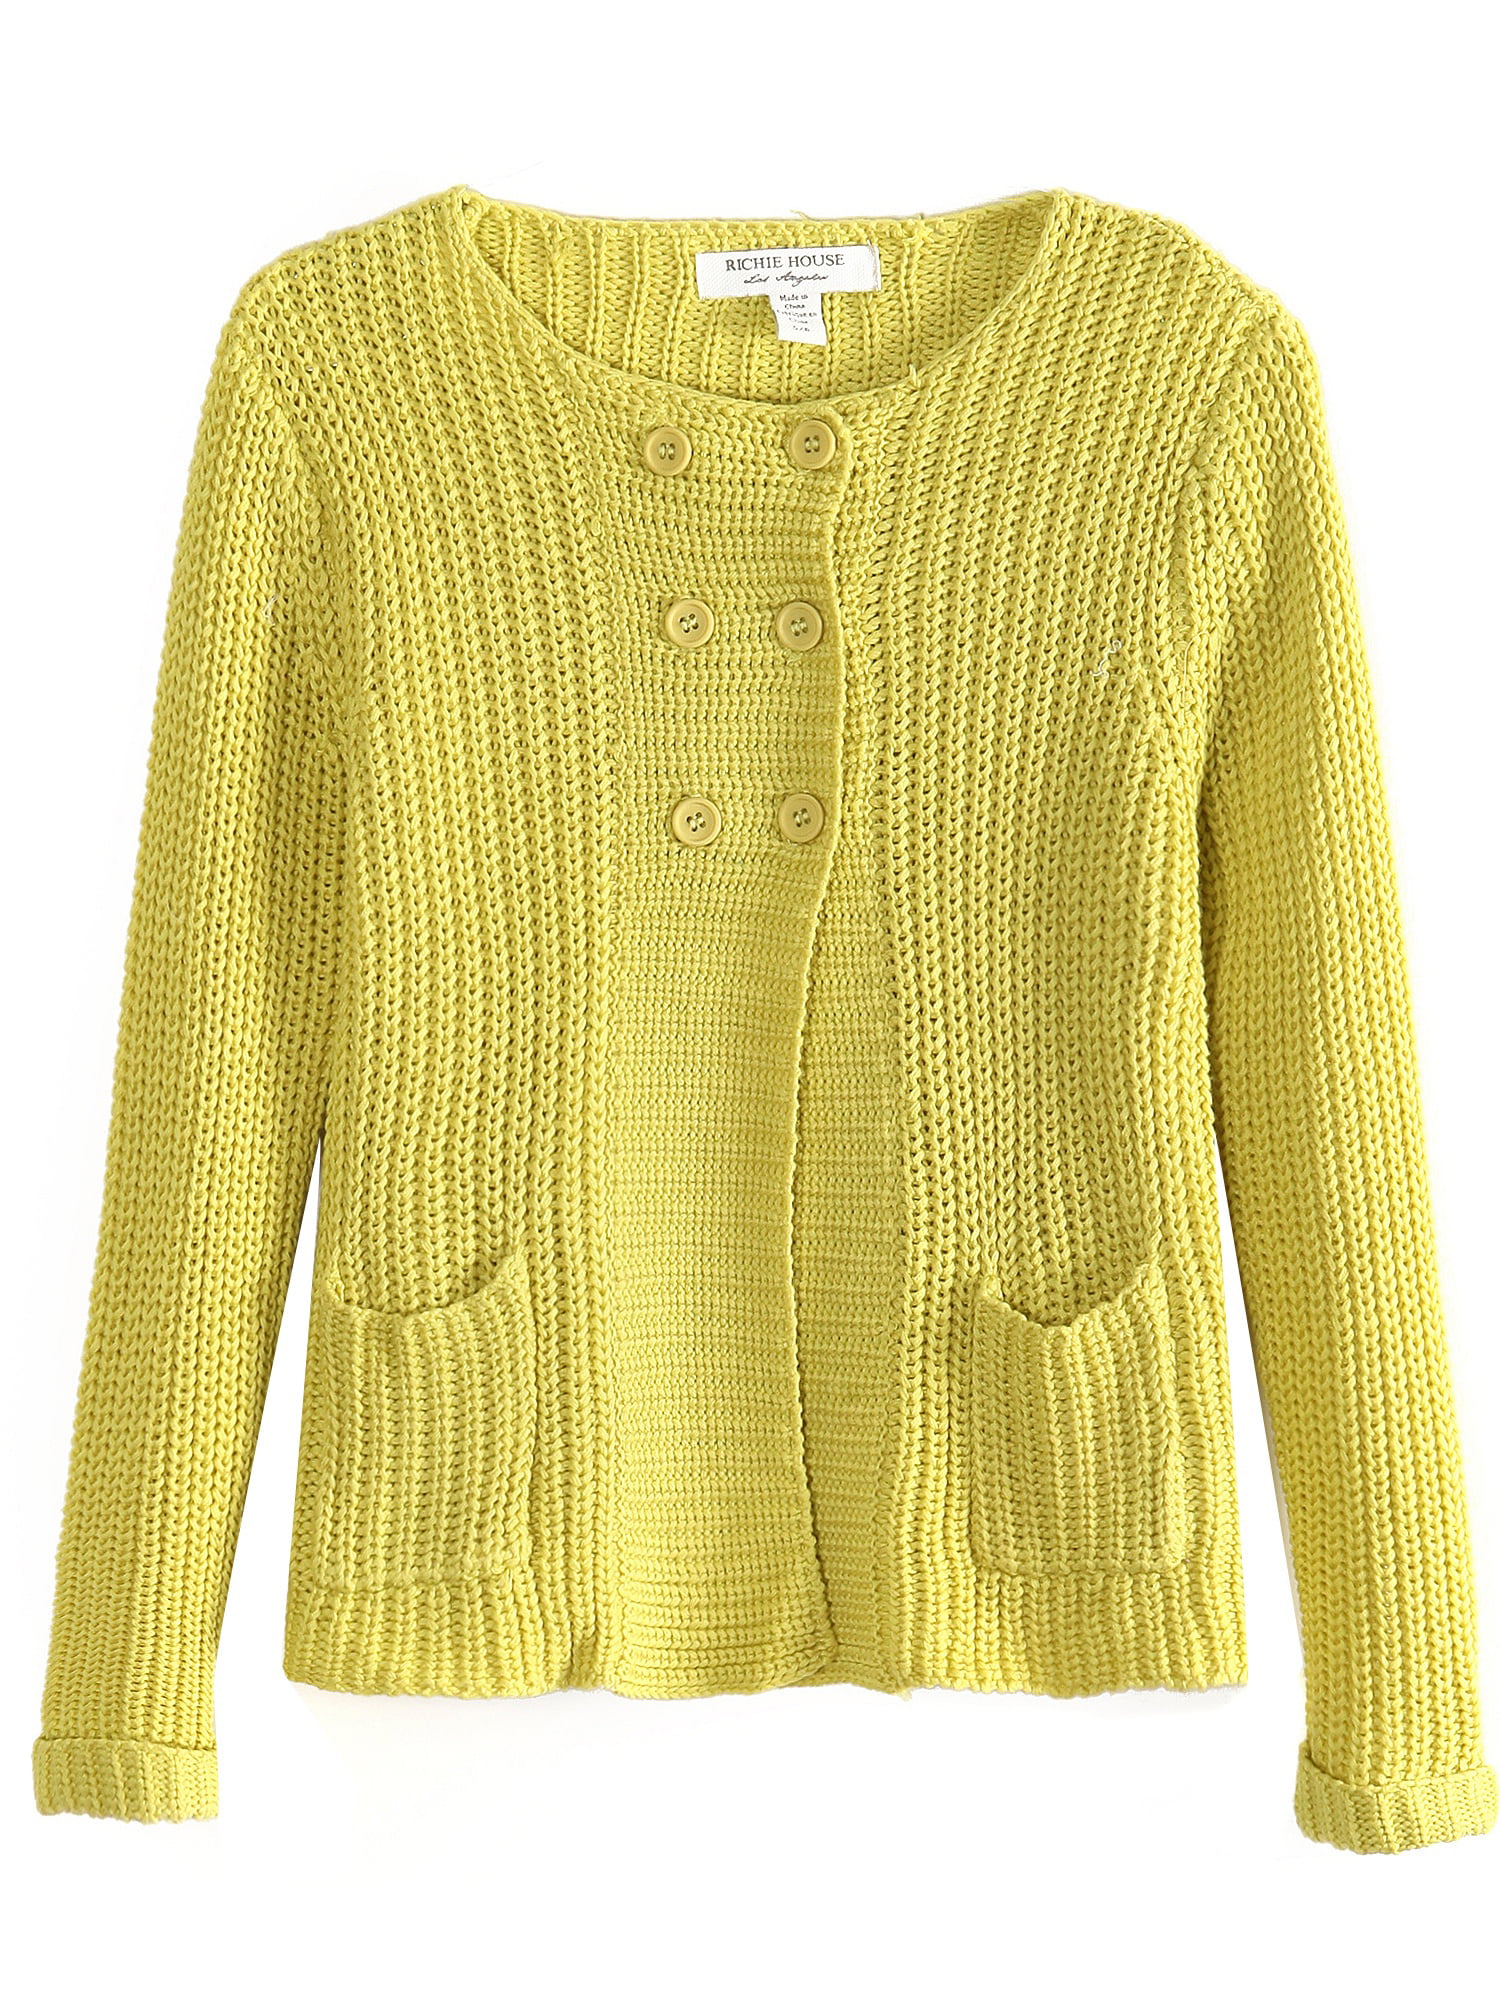 Richie House Girls' Double Row Buttons Cardigan Sweater RH0773-A-3/4 ...